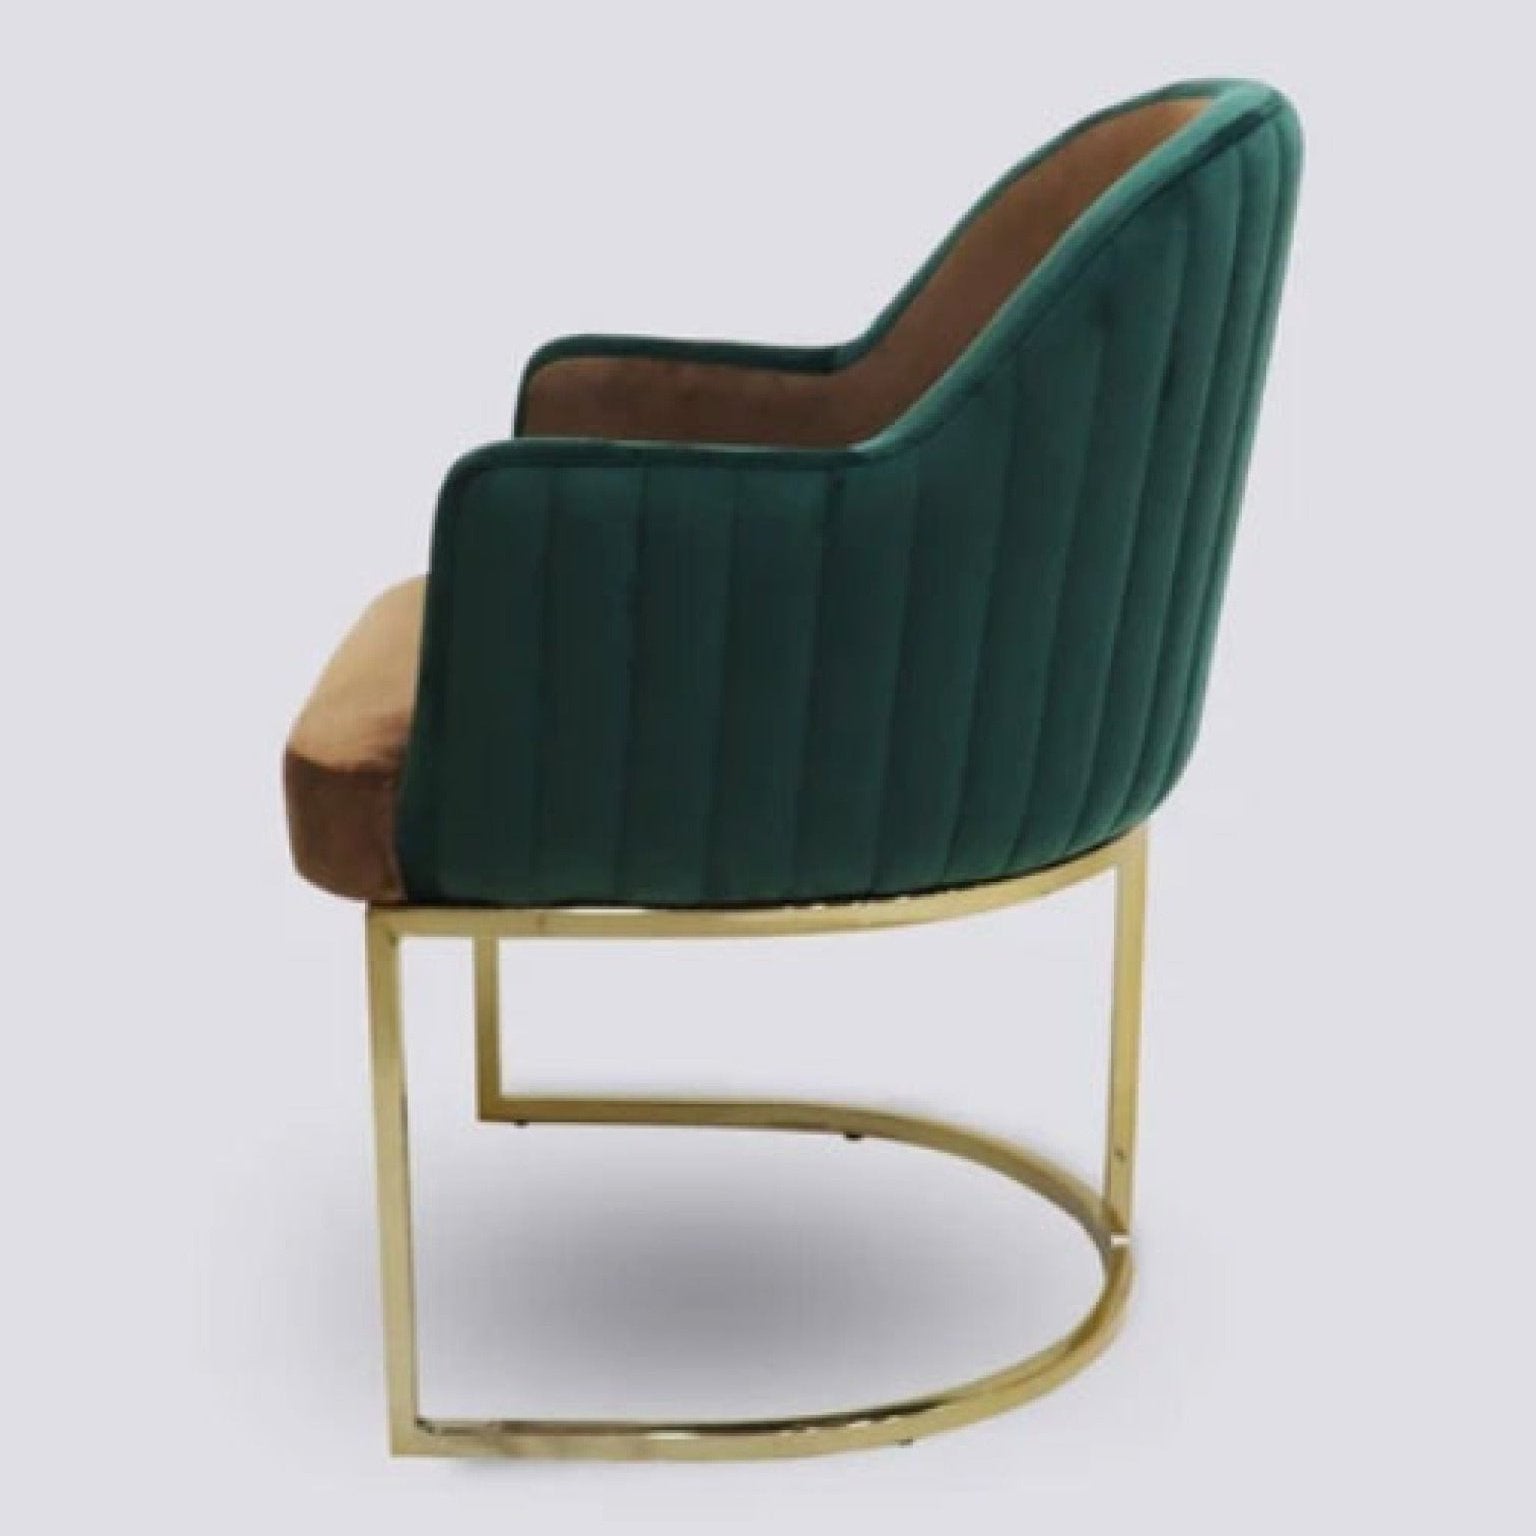 LUX-500 DINING CHAIR Mobel Furniture